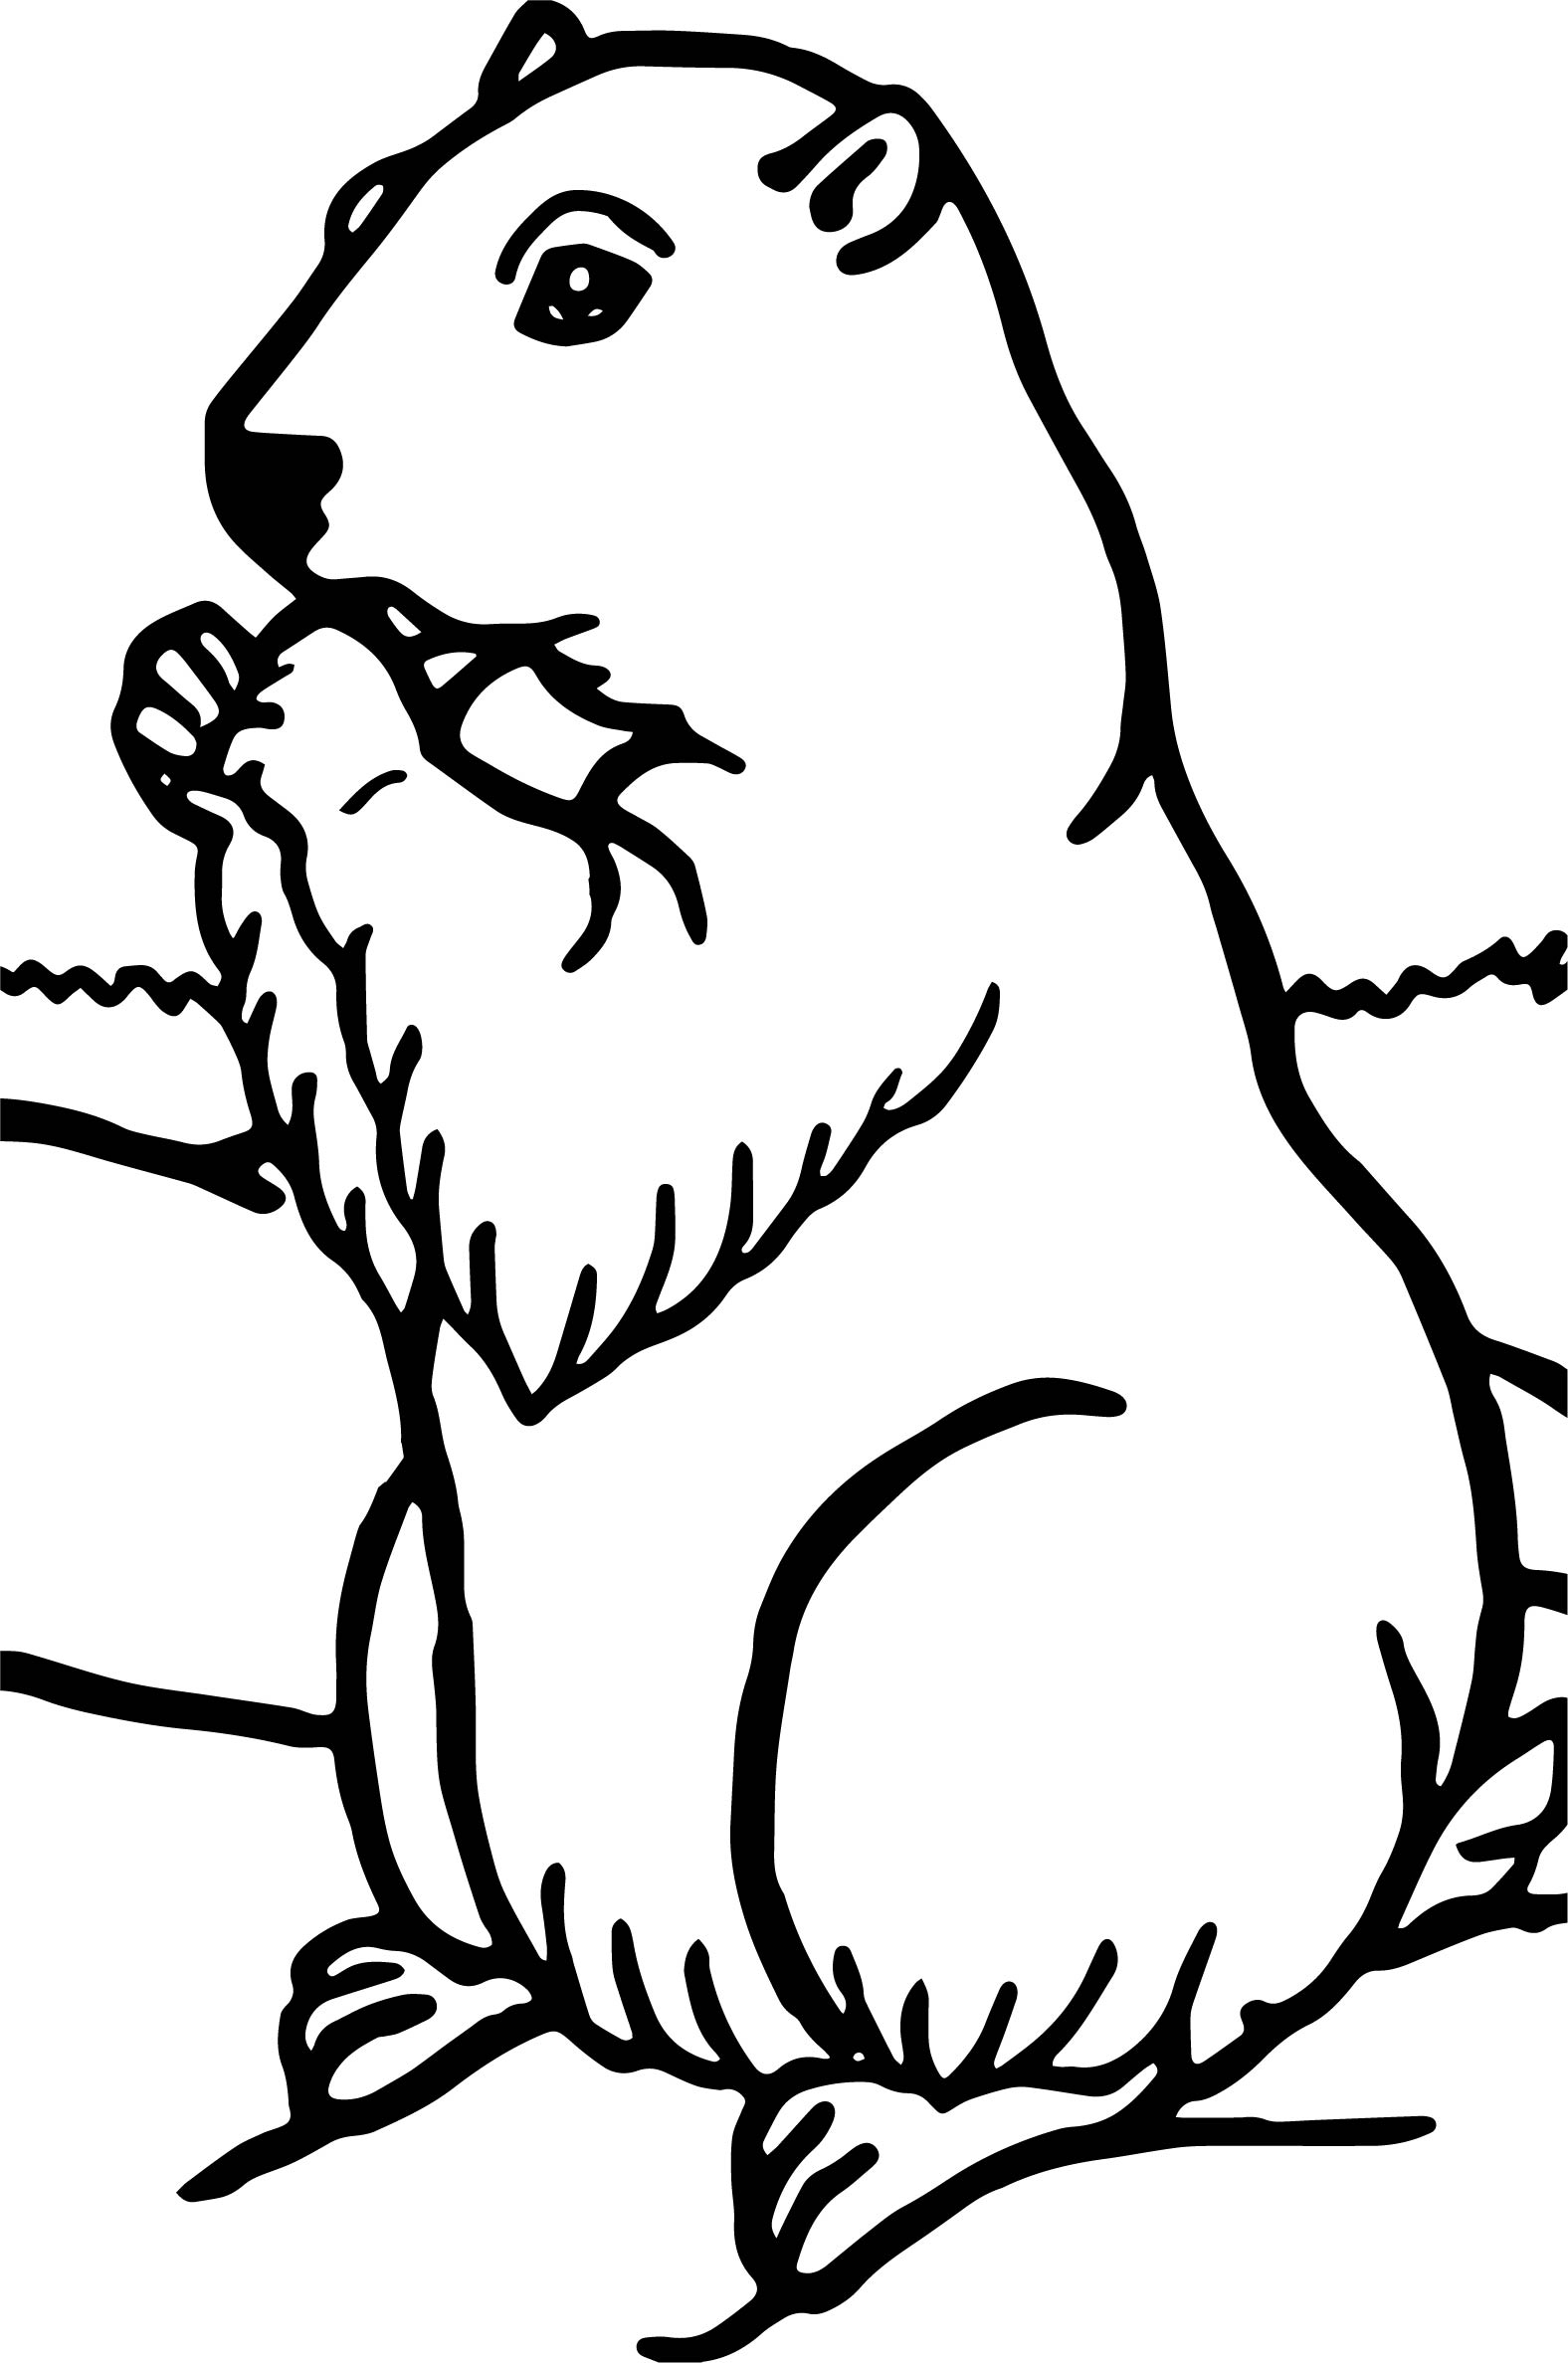 Groundhog Coloring Pages Best Coloring Pages For Kids